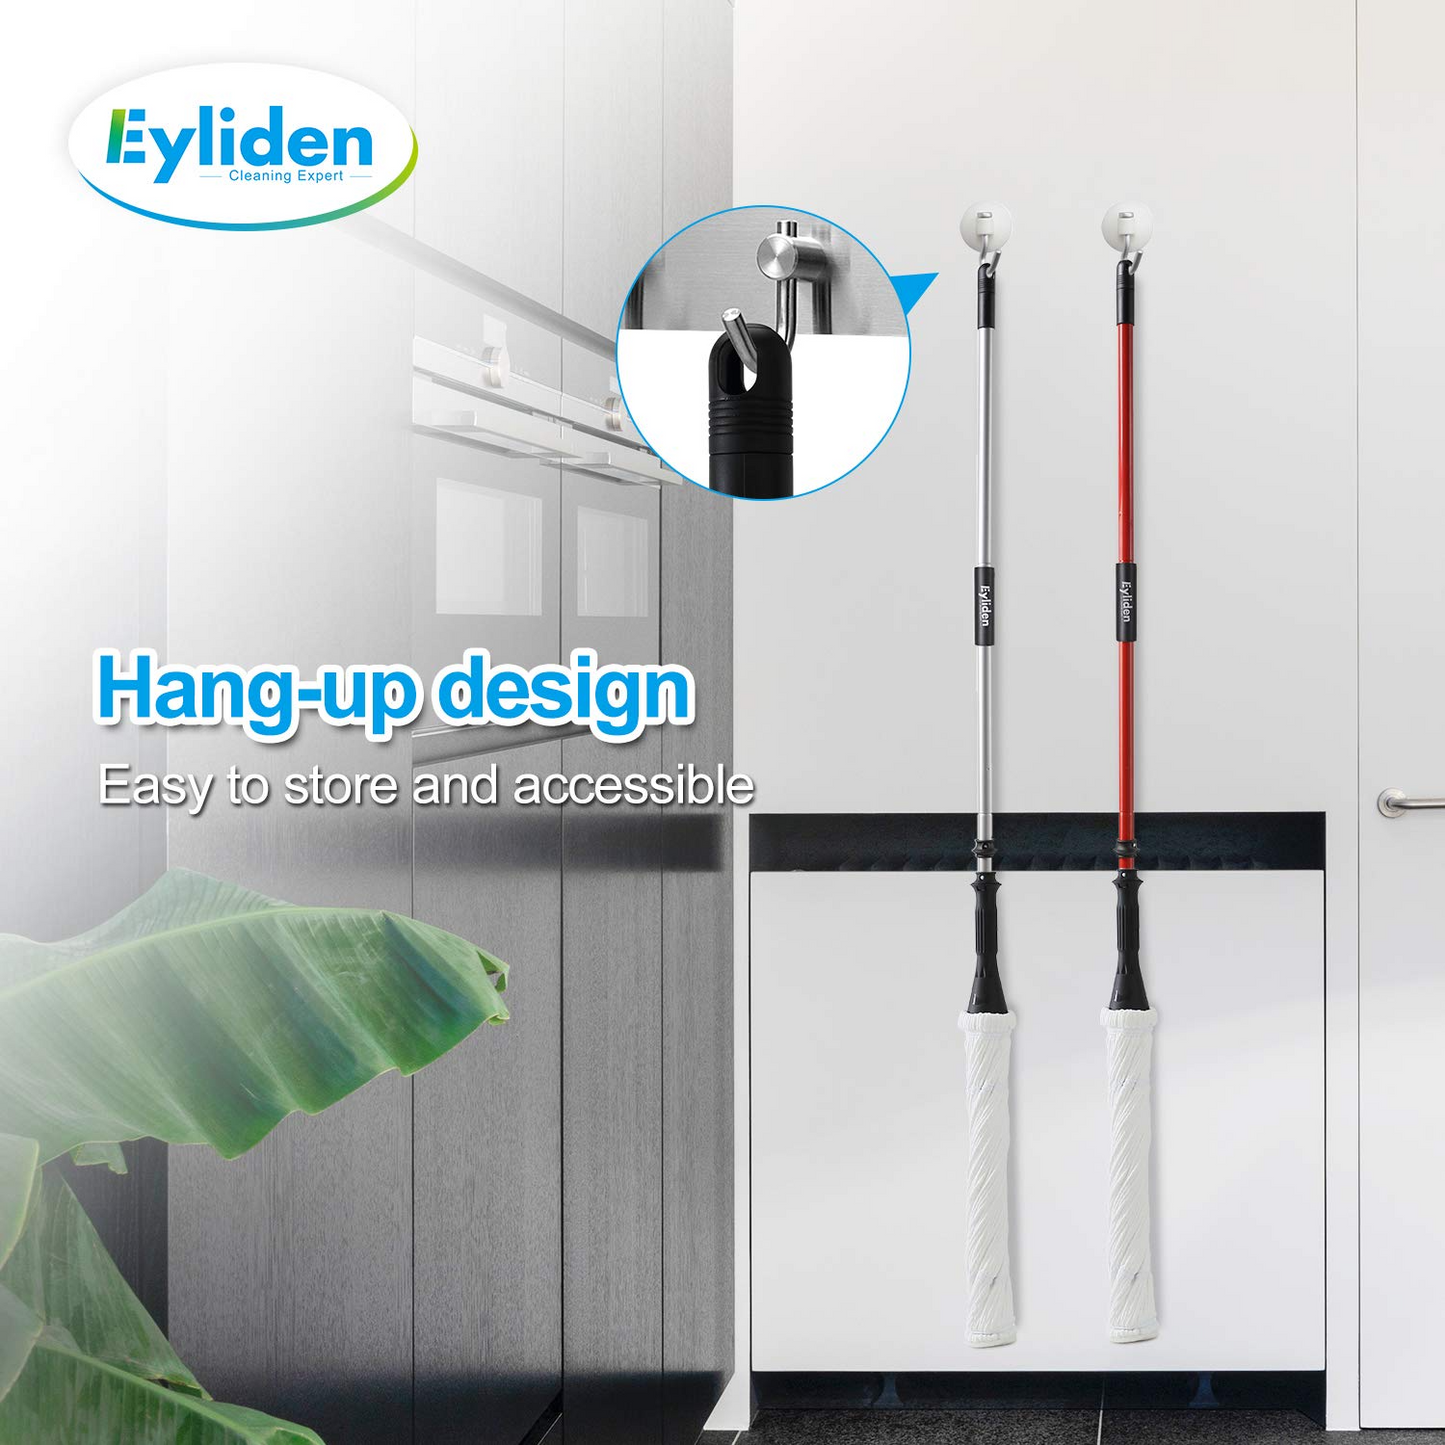 Eyliden Mop with 2 Reusable Heads, Easy Wringing Twist Mop, with 57.5 inch Long Handle, Wet Mops for Floor Cleaning, Commercial Household Clean Hardwood, Vinyl, Tile, and More (Silver, Red, Blue, Grey)